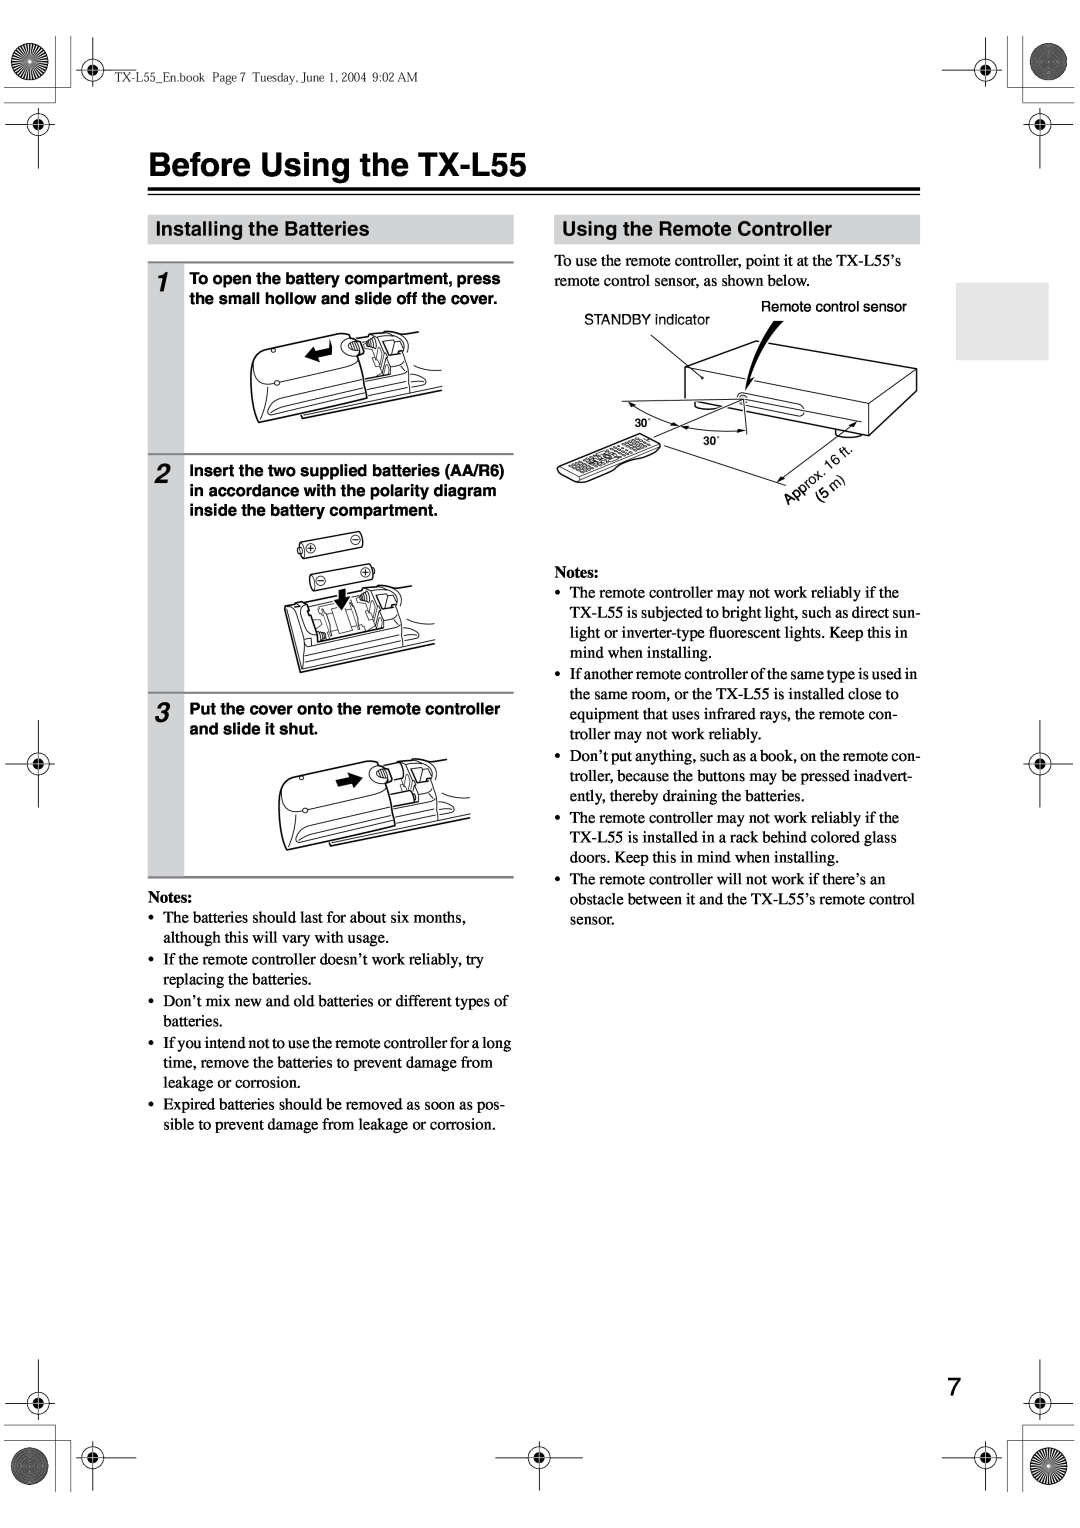 Onkyo instruction manual Before Using the TX-L55, Installing the Batteries, Using the Remote Controller 